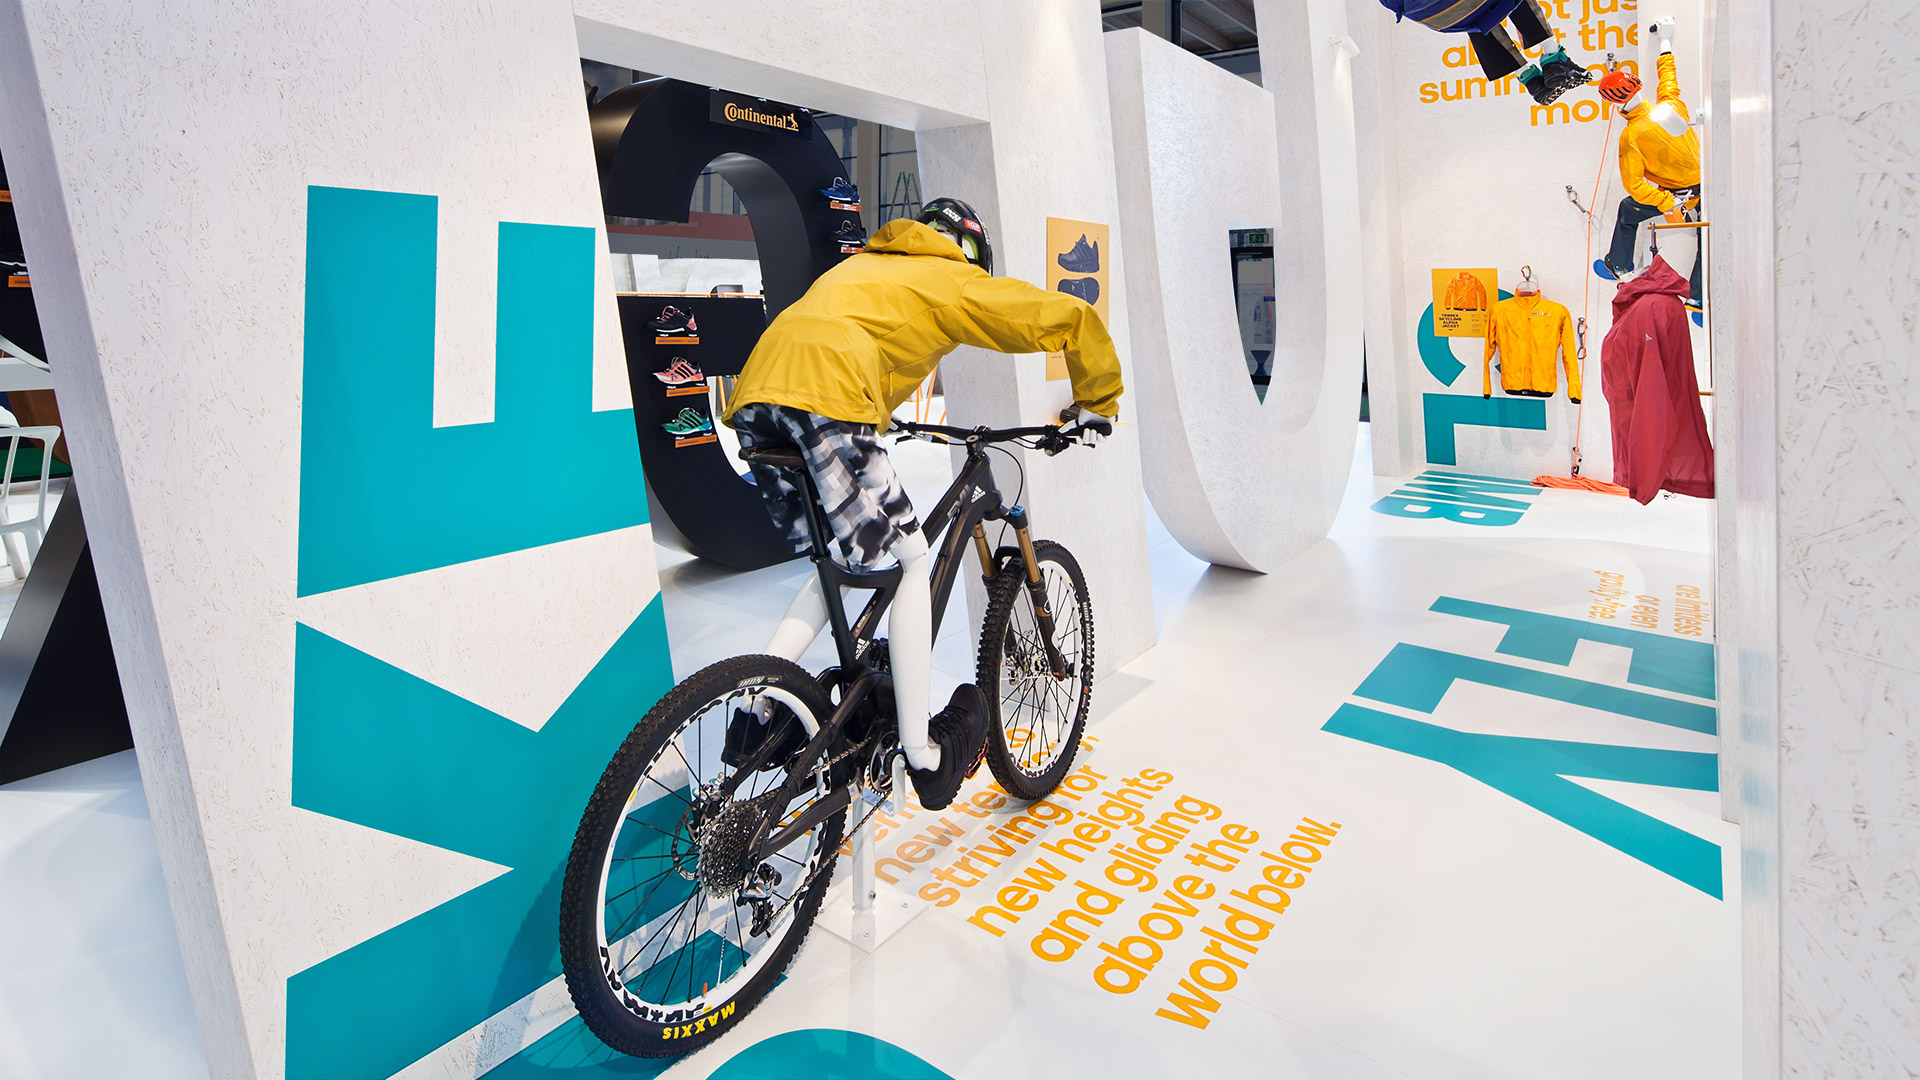 Dart stages the adidas fair stand at the OutDoor 2015